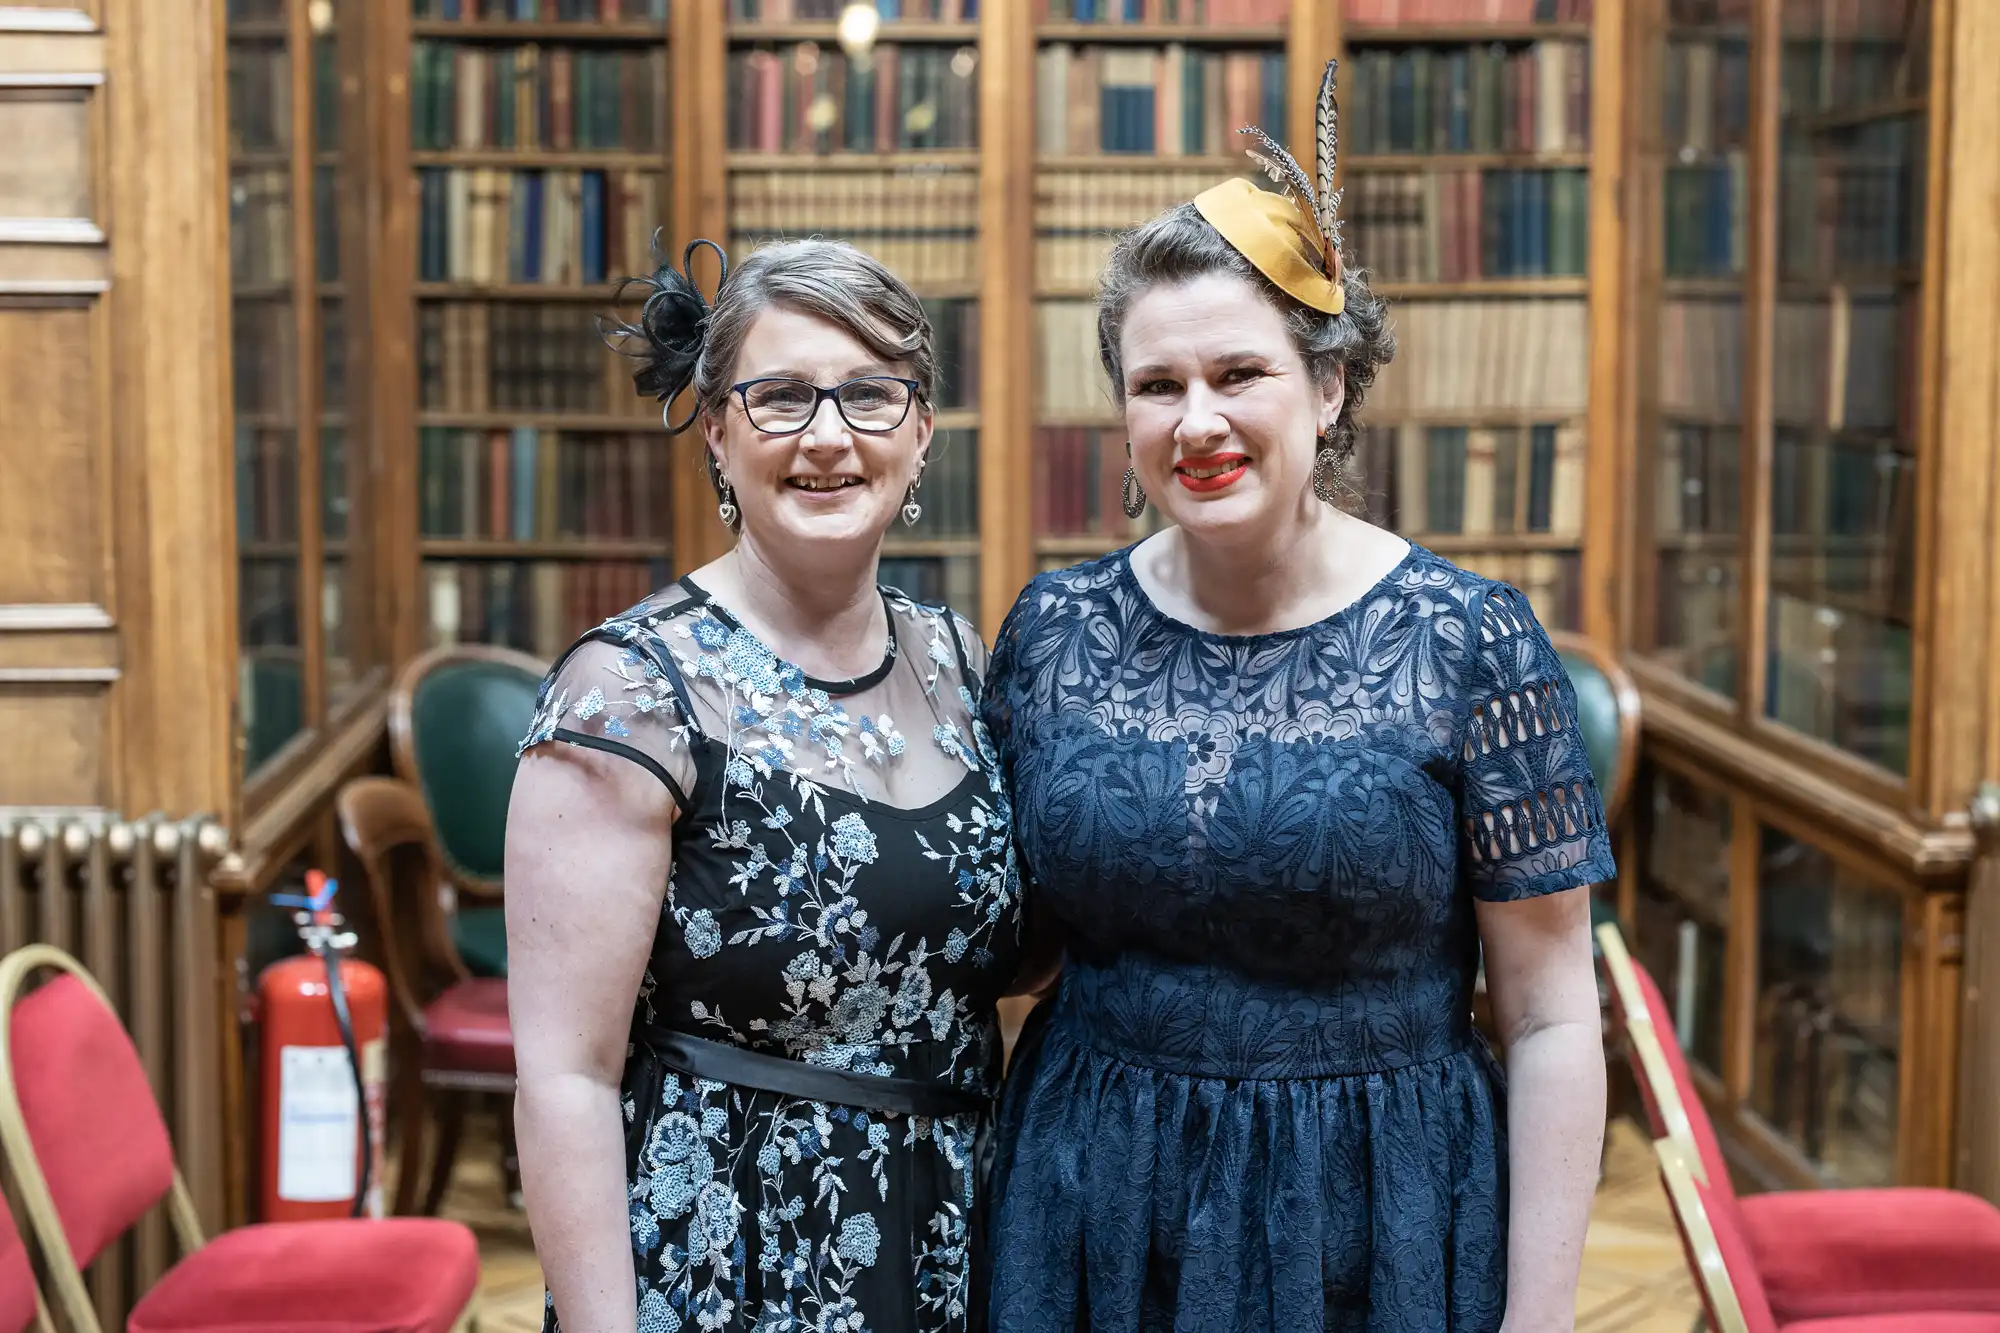 Two women, each in an evening dress, stand side by side in a room with bookshelves and chairs. One woman wears glasses and a flowered dress. The other woman wears a fascinator and a lace dress.